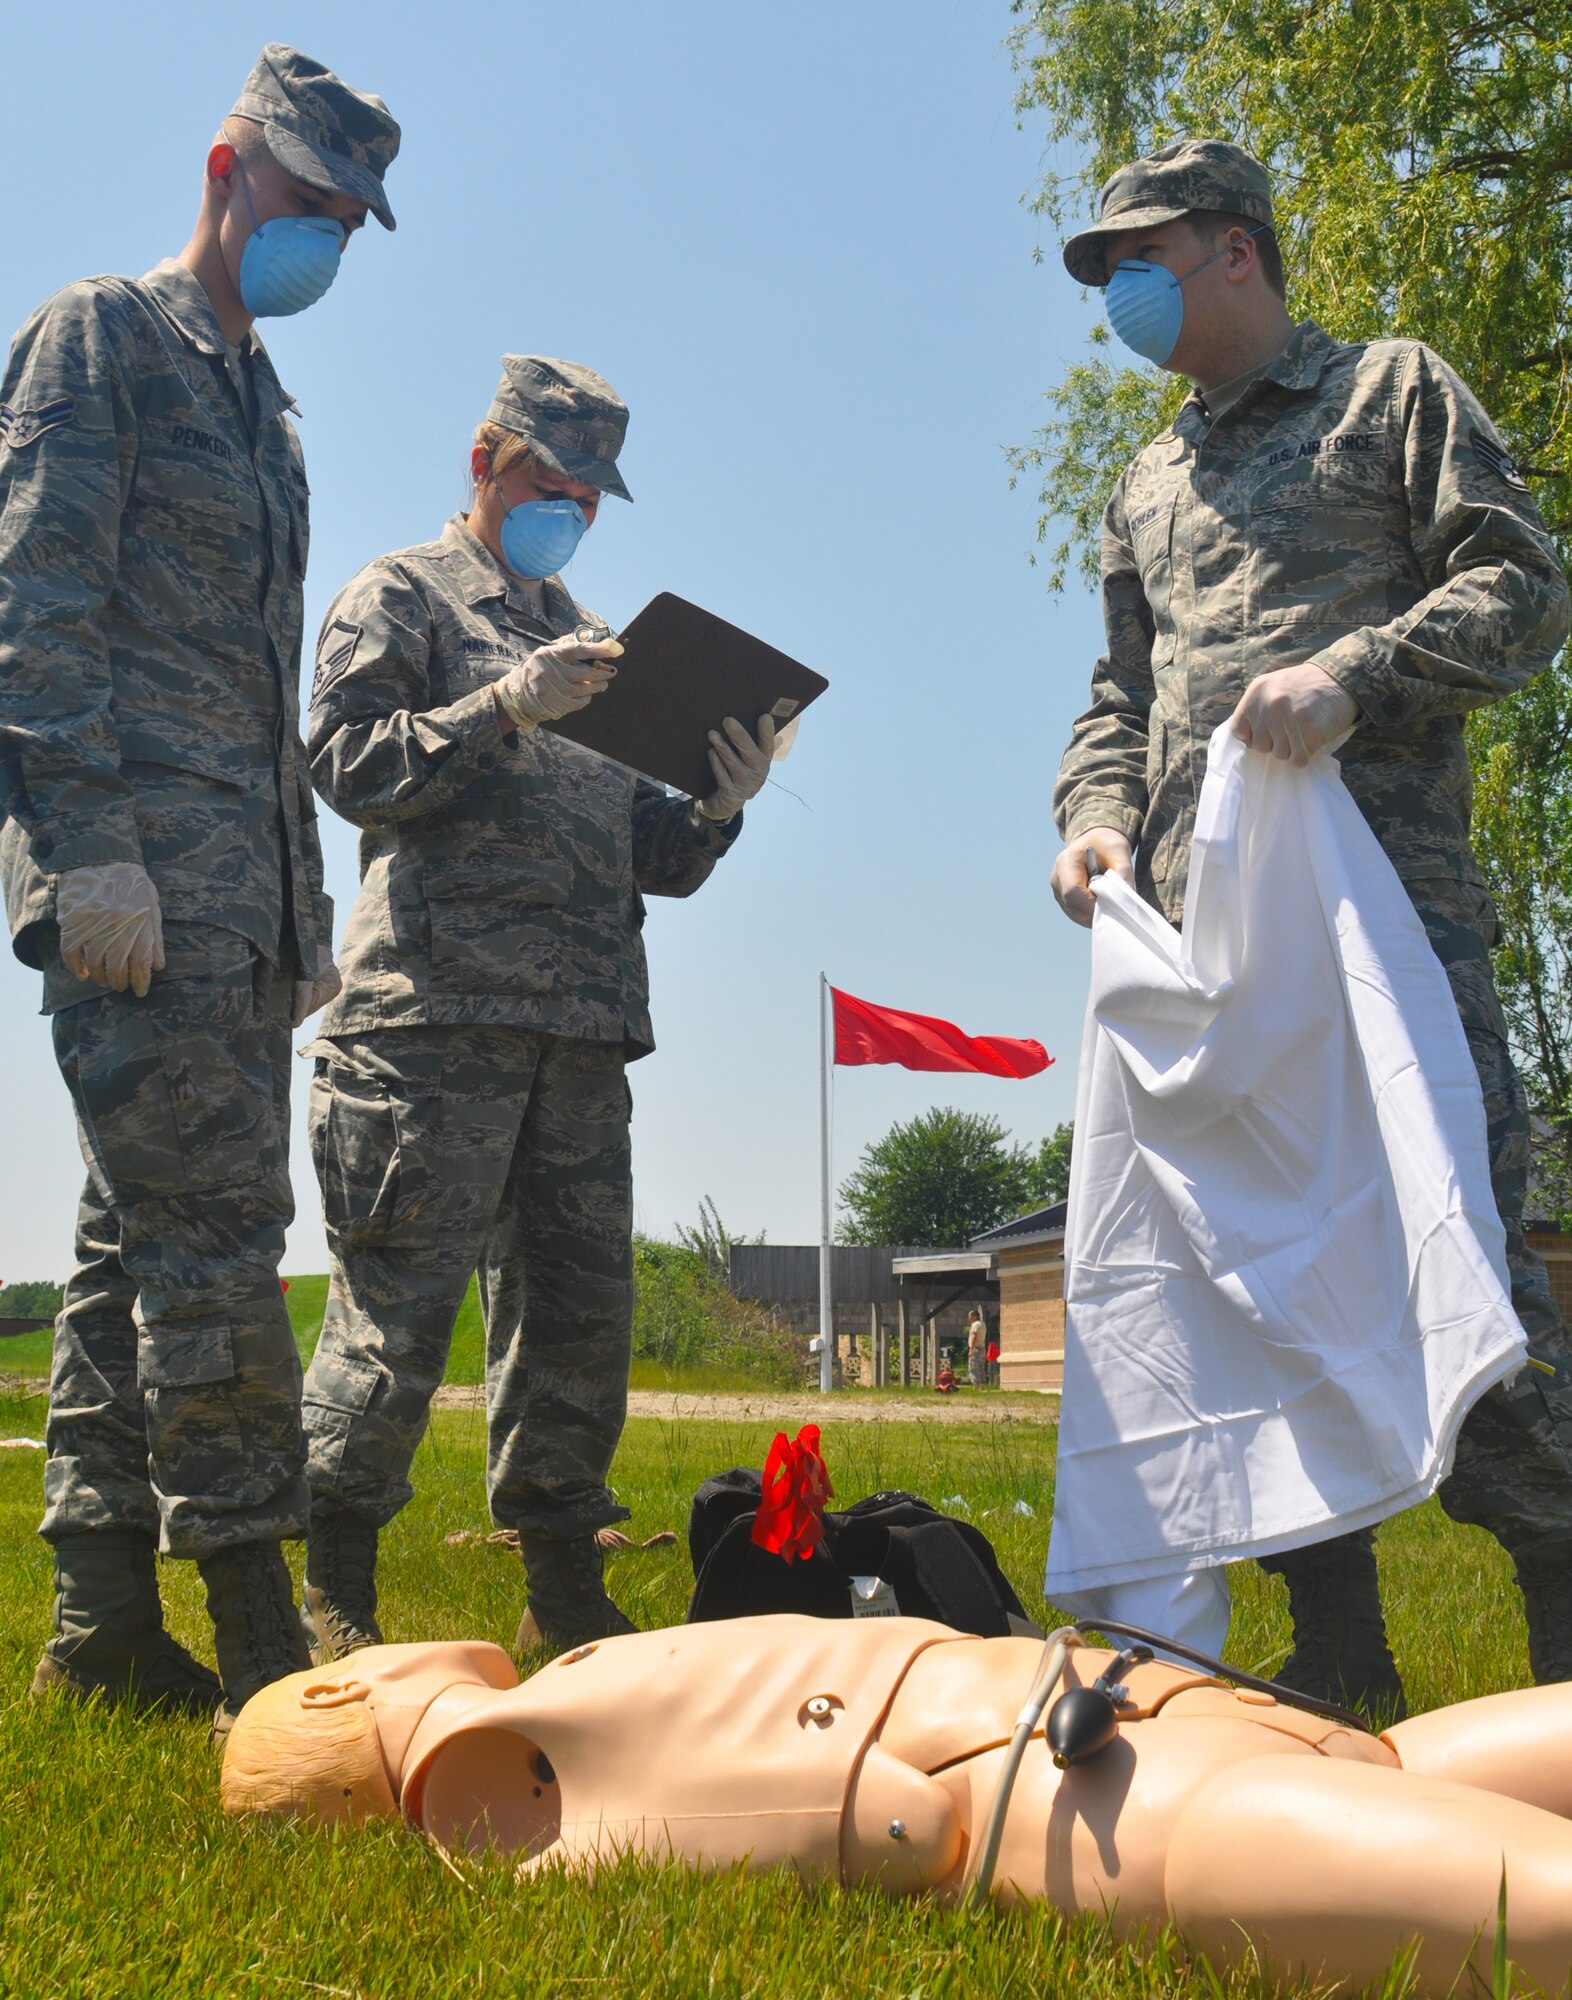 Airman Steven Penkert and Staff Sgt. Matthew Bohlen, both assigned to the 128th Air Refueling Wing Force Support Squadron, recover a simulated corpse during a Search and Recovery training exercise at Gen. Mitchell International Airport on Sunday, June 26, 2011.  The training program is an annual event that prepares Airmen for their roles as members of the Search and Recovery Team, which is responsible for recovering deceased service members at incident sites; the team is led by the mortuary affairs officer.  (U.S. Air Force photo by Staff Sgt. Jeremy Wilson / Released)  